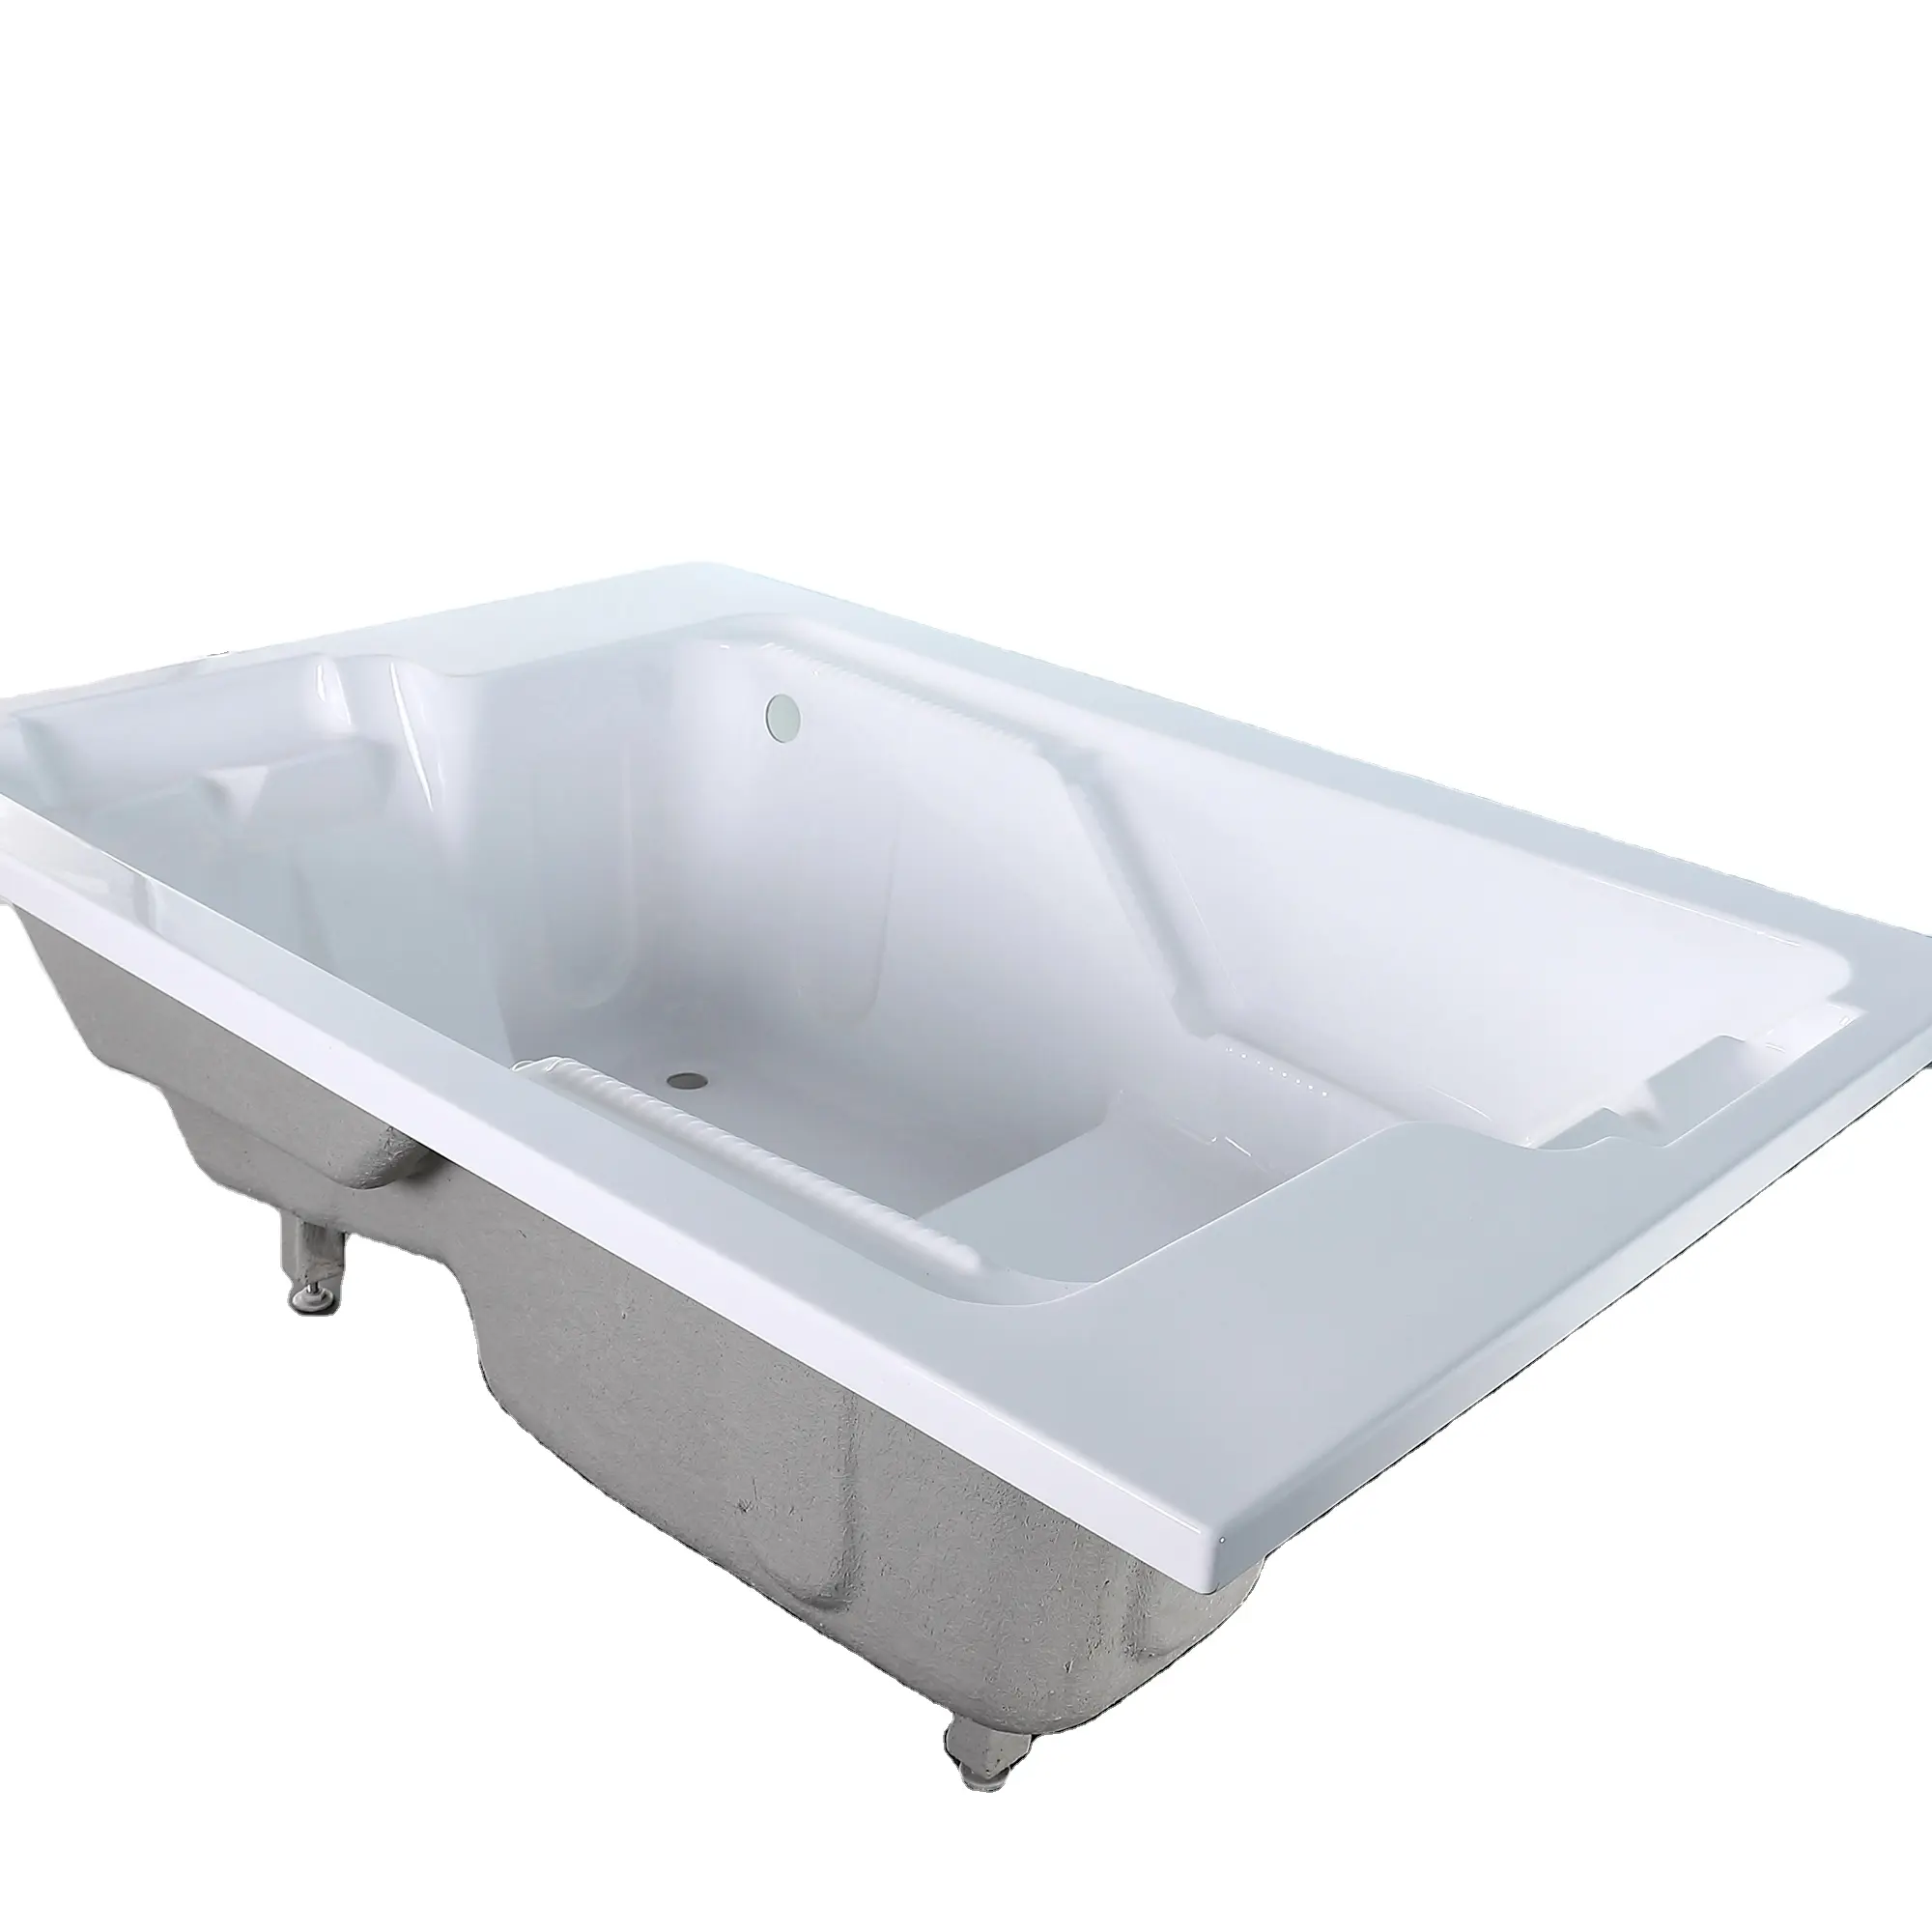 CUPC Certification Factory The Best Price The Best Quality Big Acrylic Rectangle Drop-in Bathtub/hot Tub For 2 People